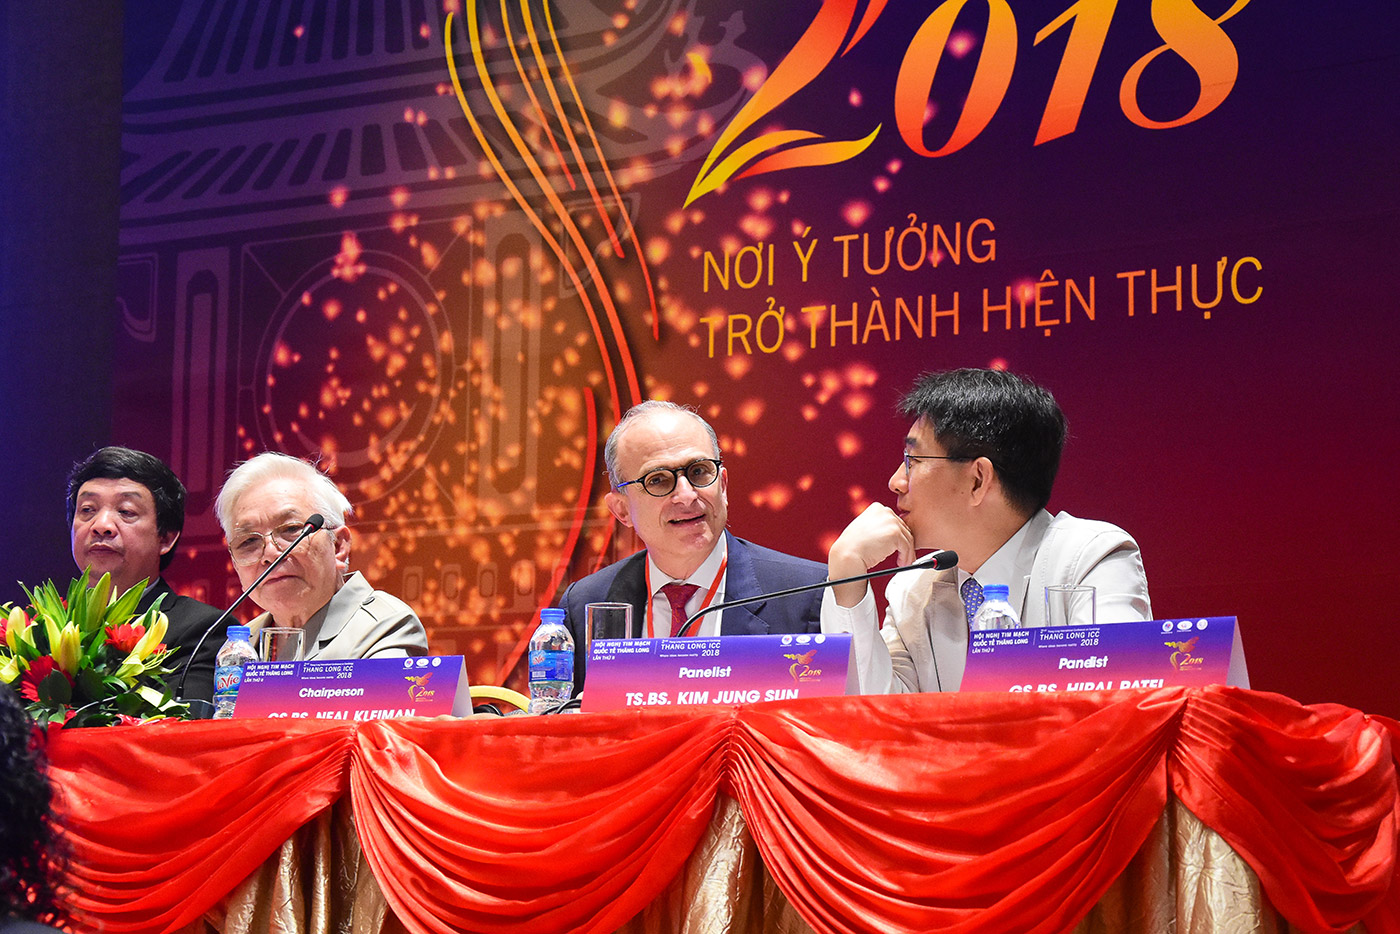 THANG LONG INTERNATIONAL CONFERENCE ON CARDIOLOGY 2018